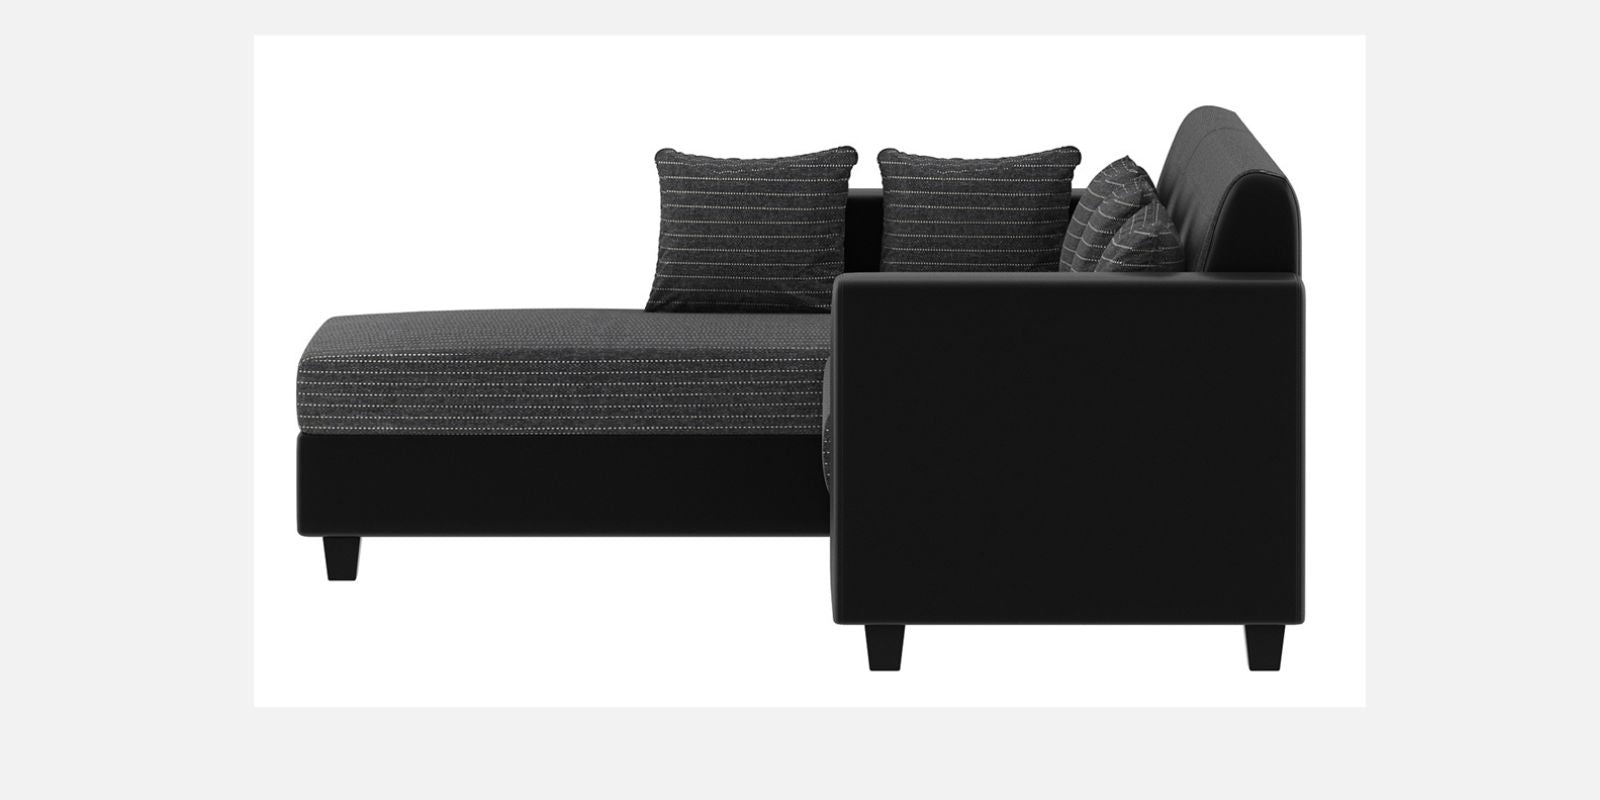 Baley Fabric LHS Sectional Sofa (2 + Lounger) In Lama Black Colour